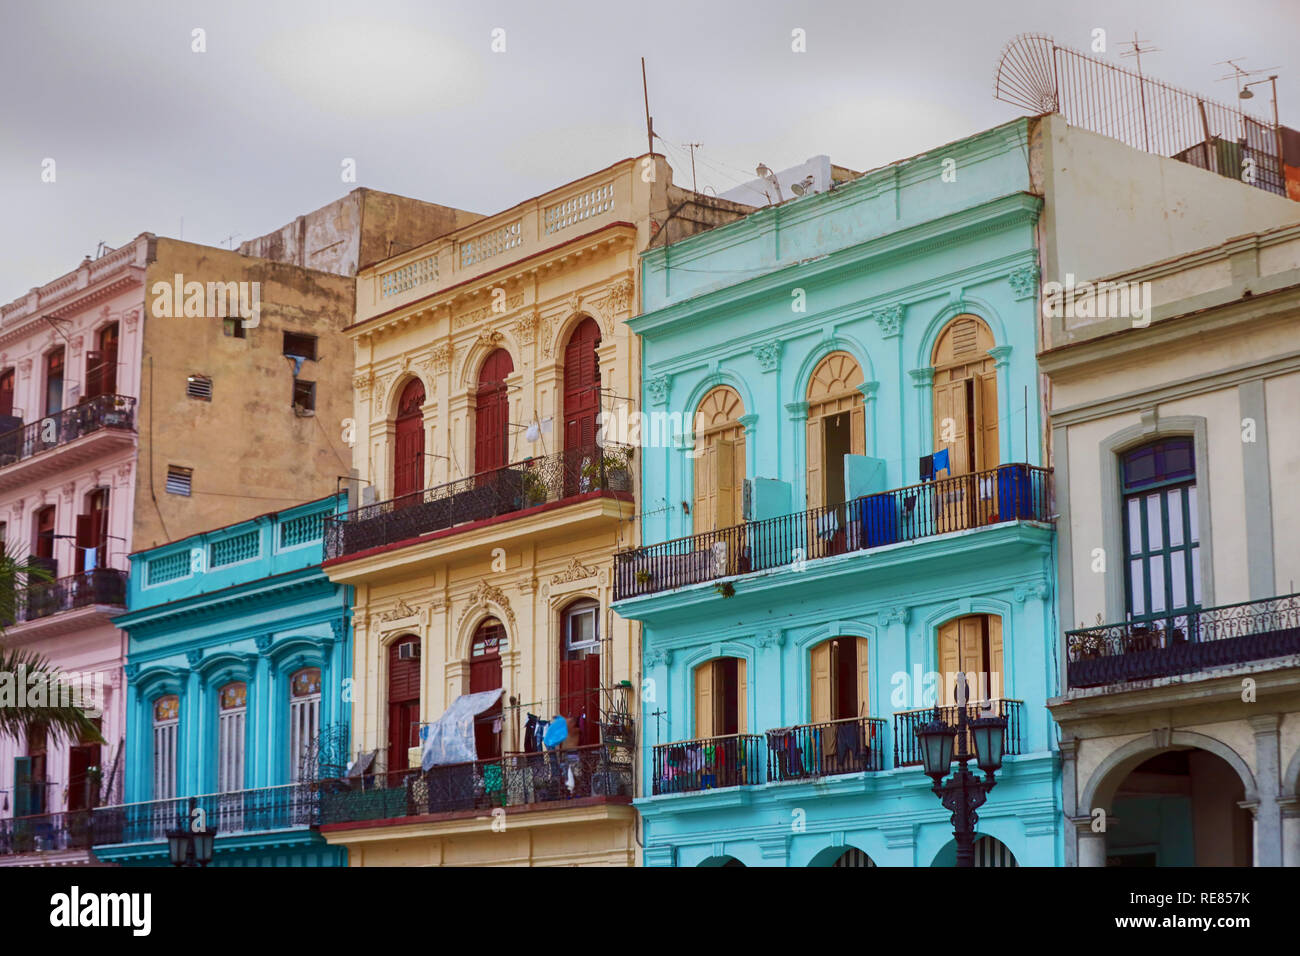 Old living colorful houses across the road in the center of Havana, Cuba Stock Photo